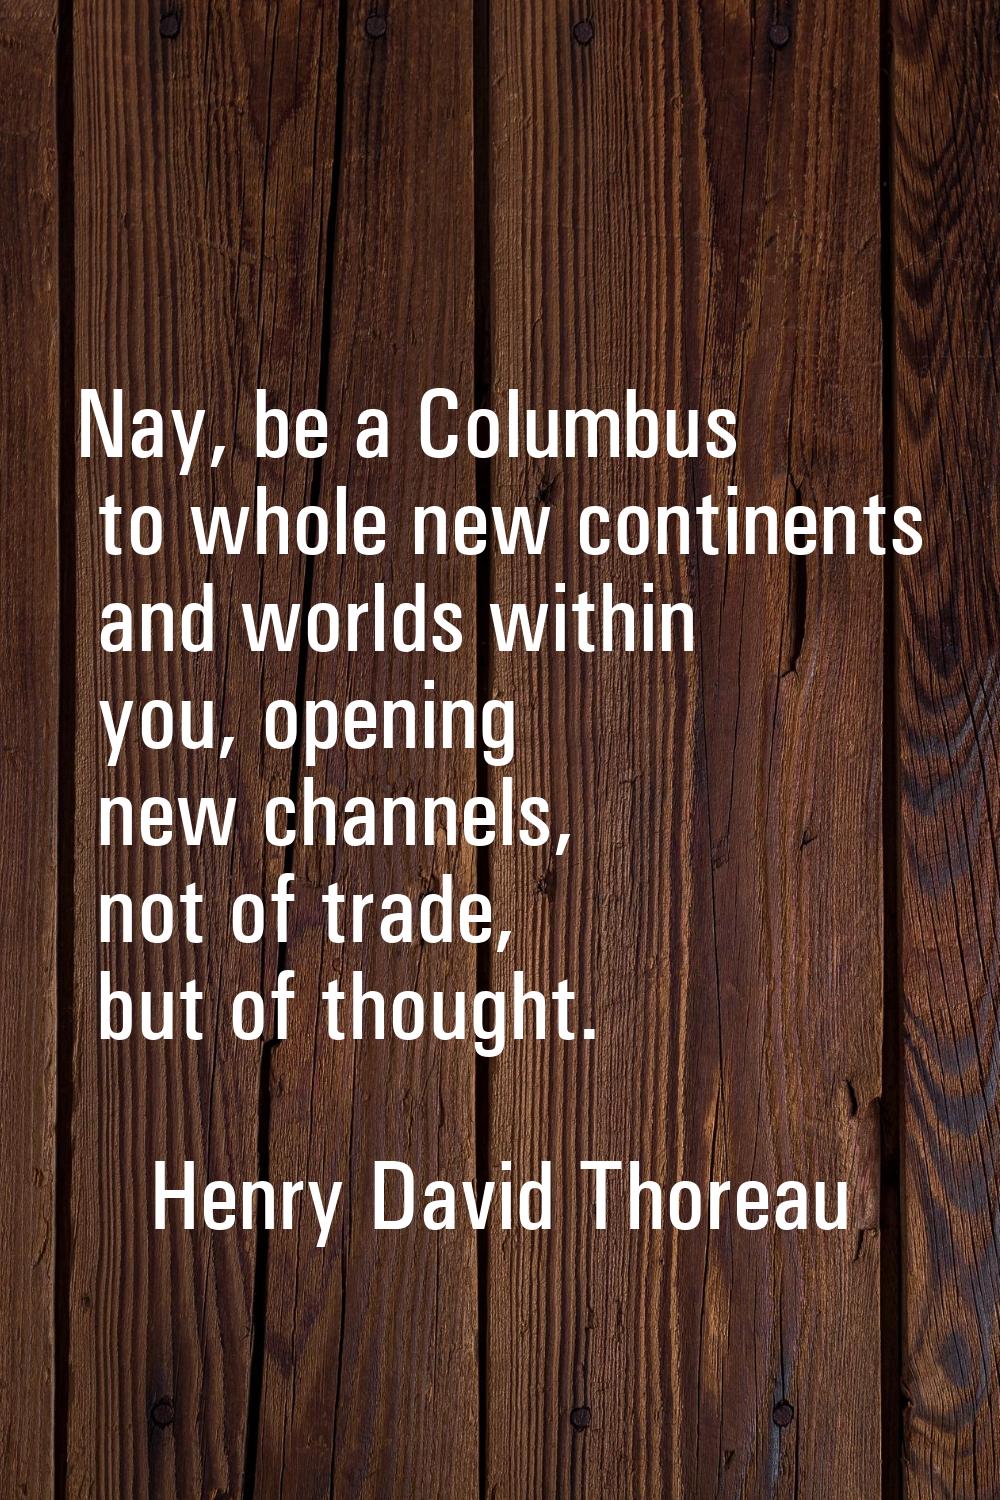 Nay, be a Columbus to whole new continents and worlds within you, opening new channels, not of trad